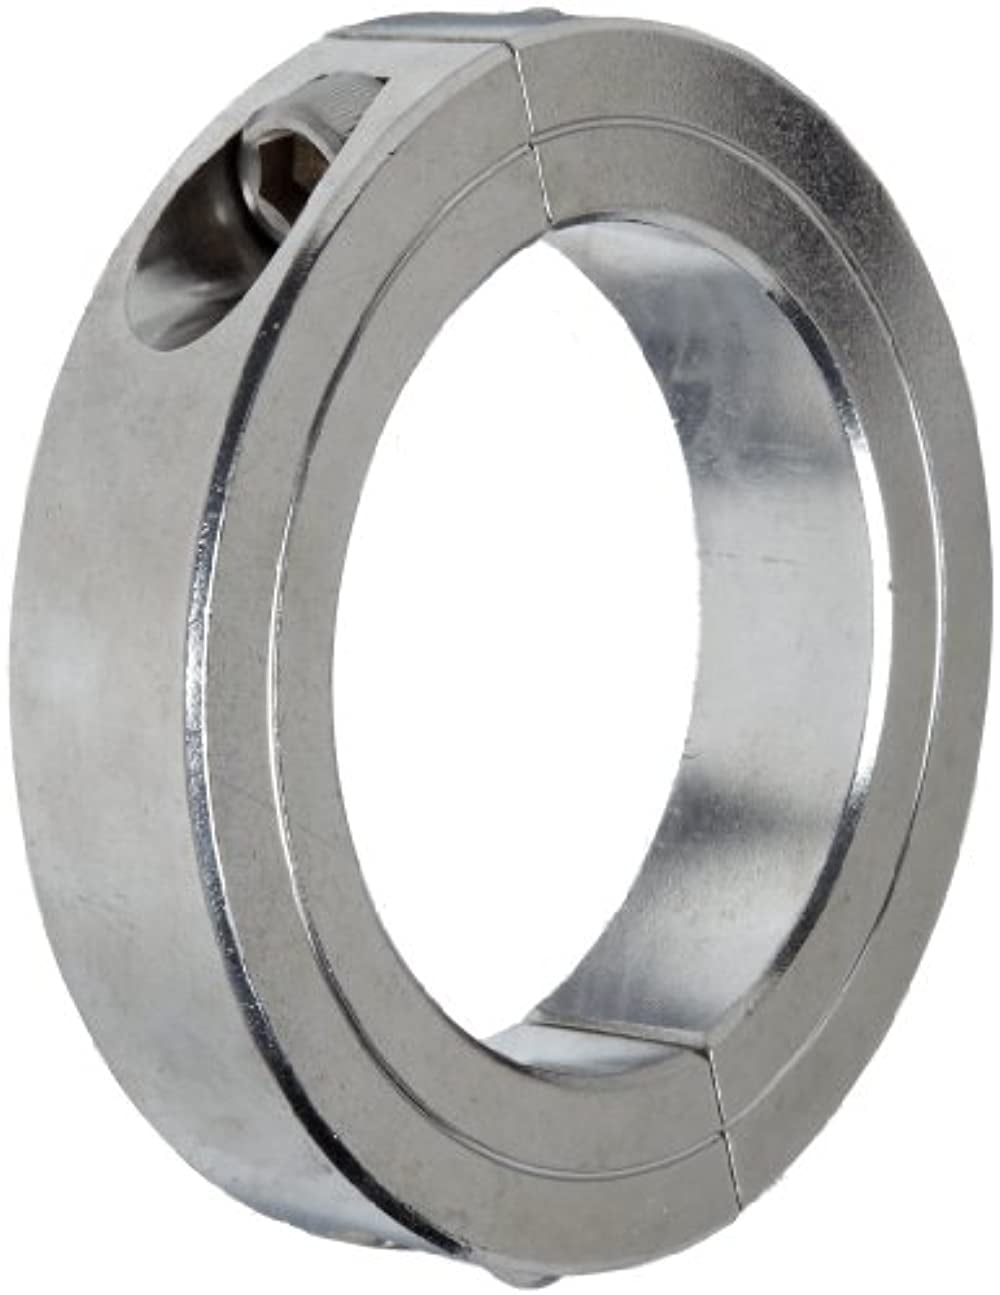 Whittet-Higins CC-04A Lightweight Clamping Shaft Collar 0.250 Bore Replaces Climax 1C-025-A 7A004, Self-Locking Stafford 1A004 Ruland CL-4-A H1C-025-A 